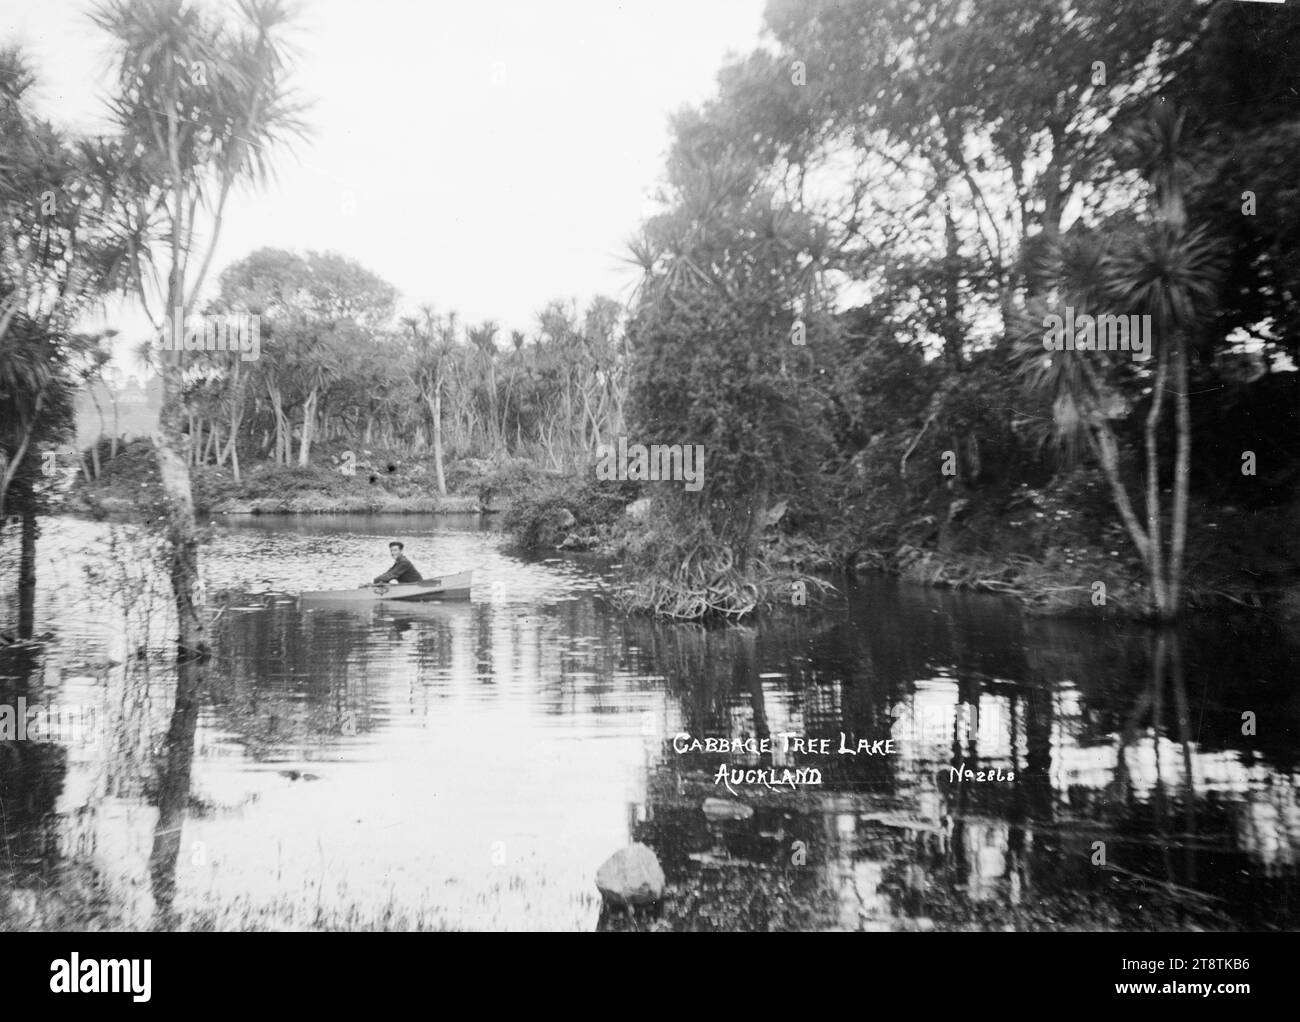 View of Cabbage Tree Lake, Auckland, New Zealand, View of a small lake surrounded by cabbage trees, with a man in a rowing boat in the centre of the lake. in early 1900s Stock Photo